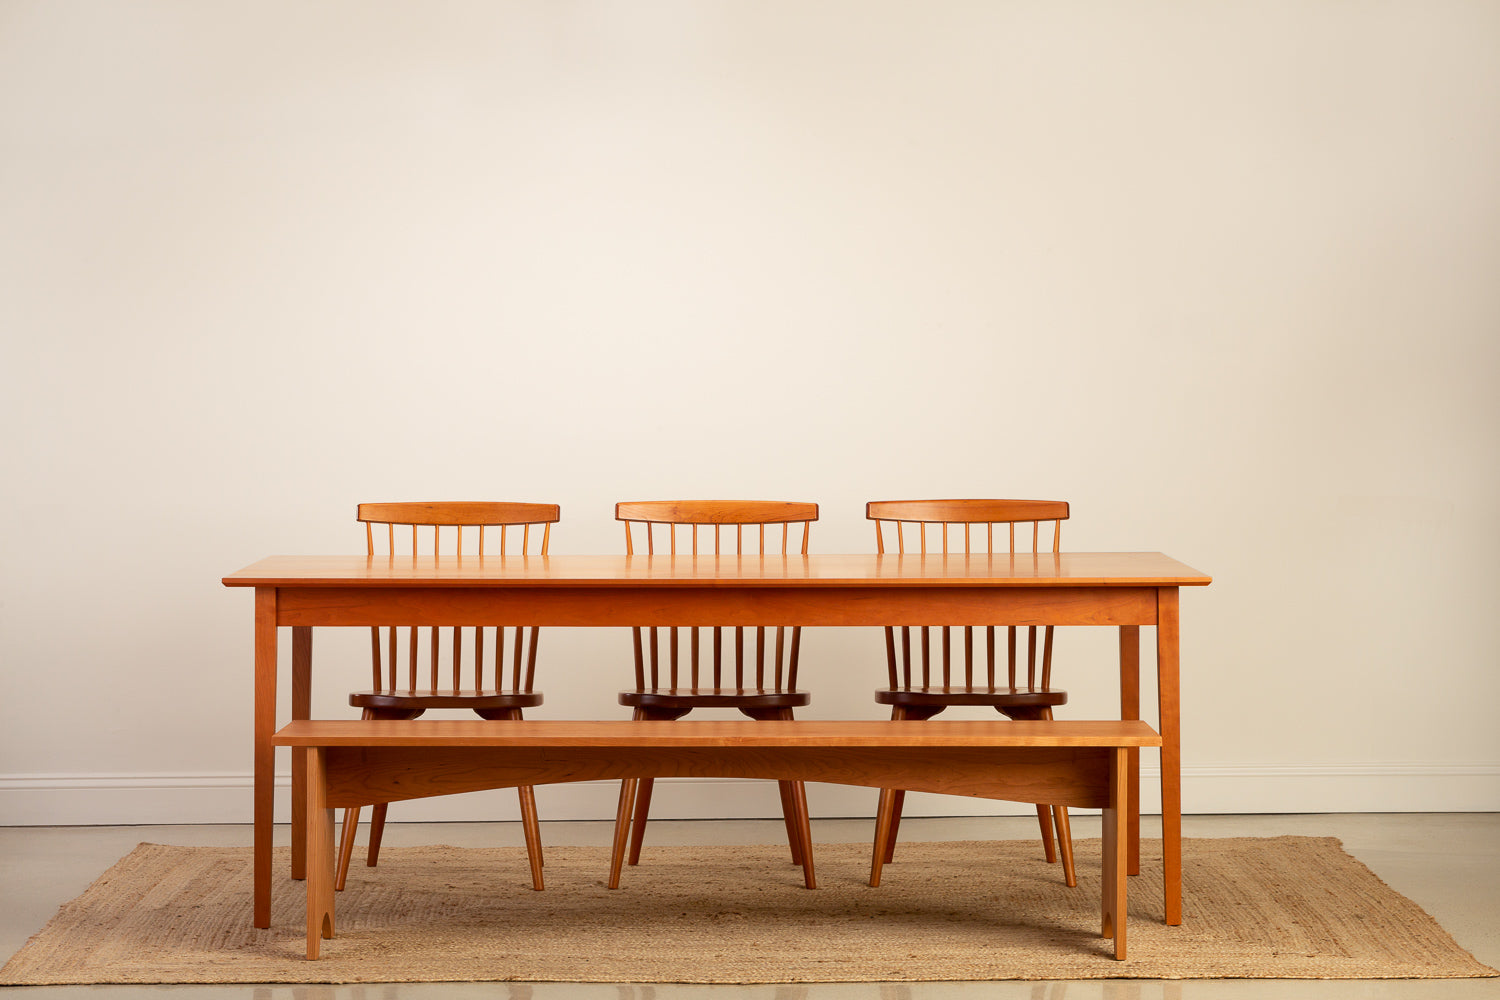 Chilton Furniture's Shaker Dining Table paired with the Shaker Bench and Chilton Spindle Chairs in solid cherry wood